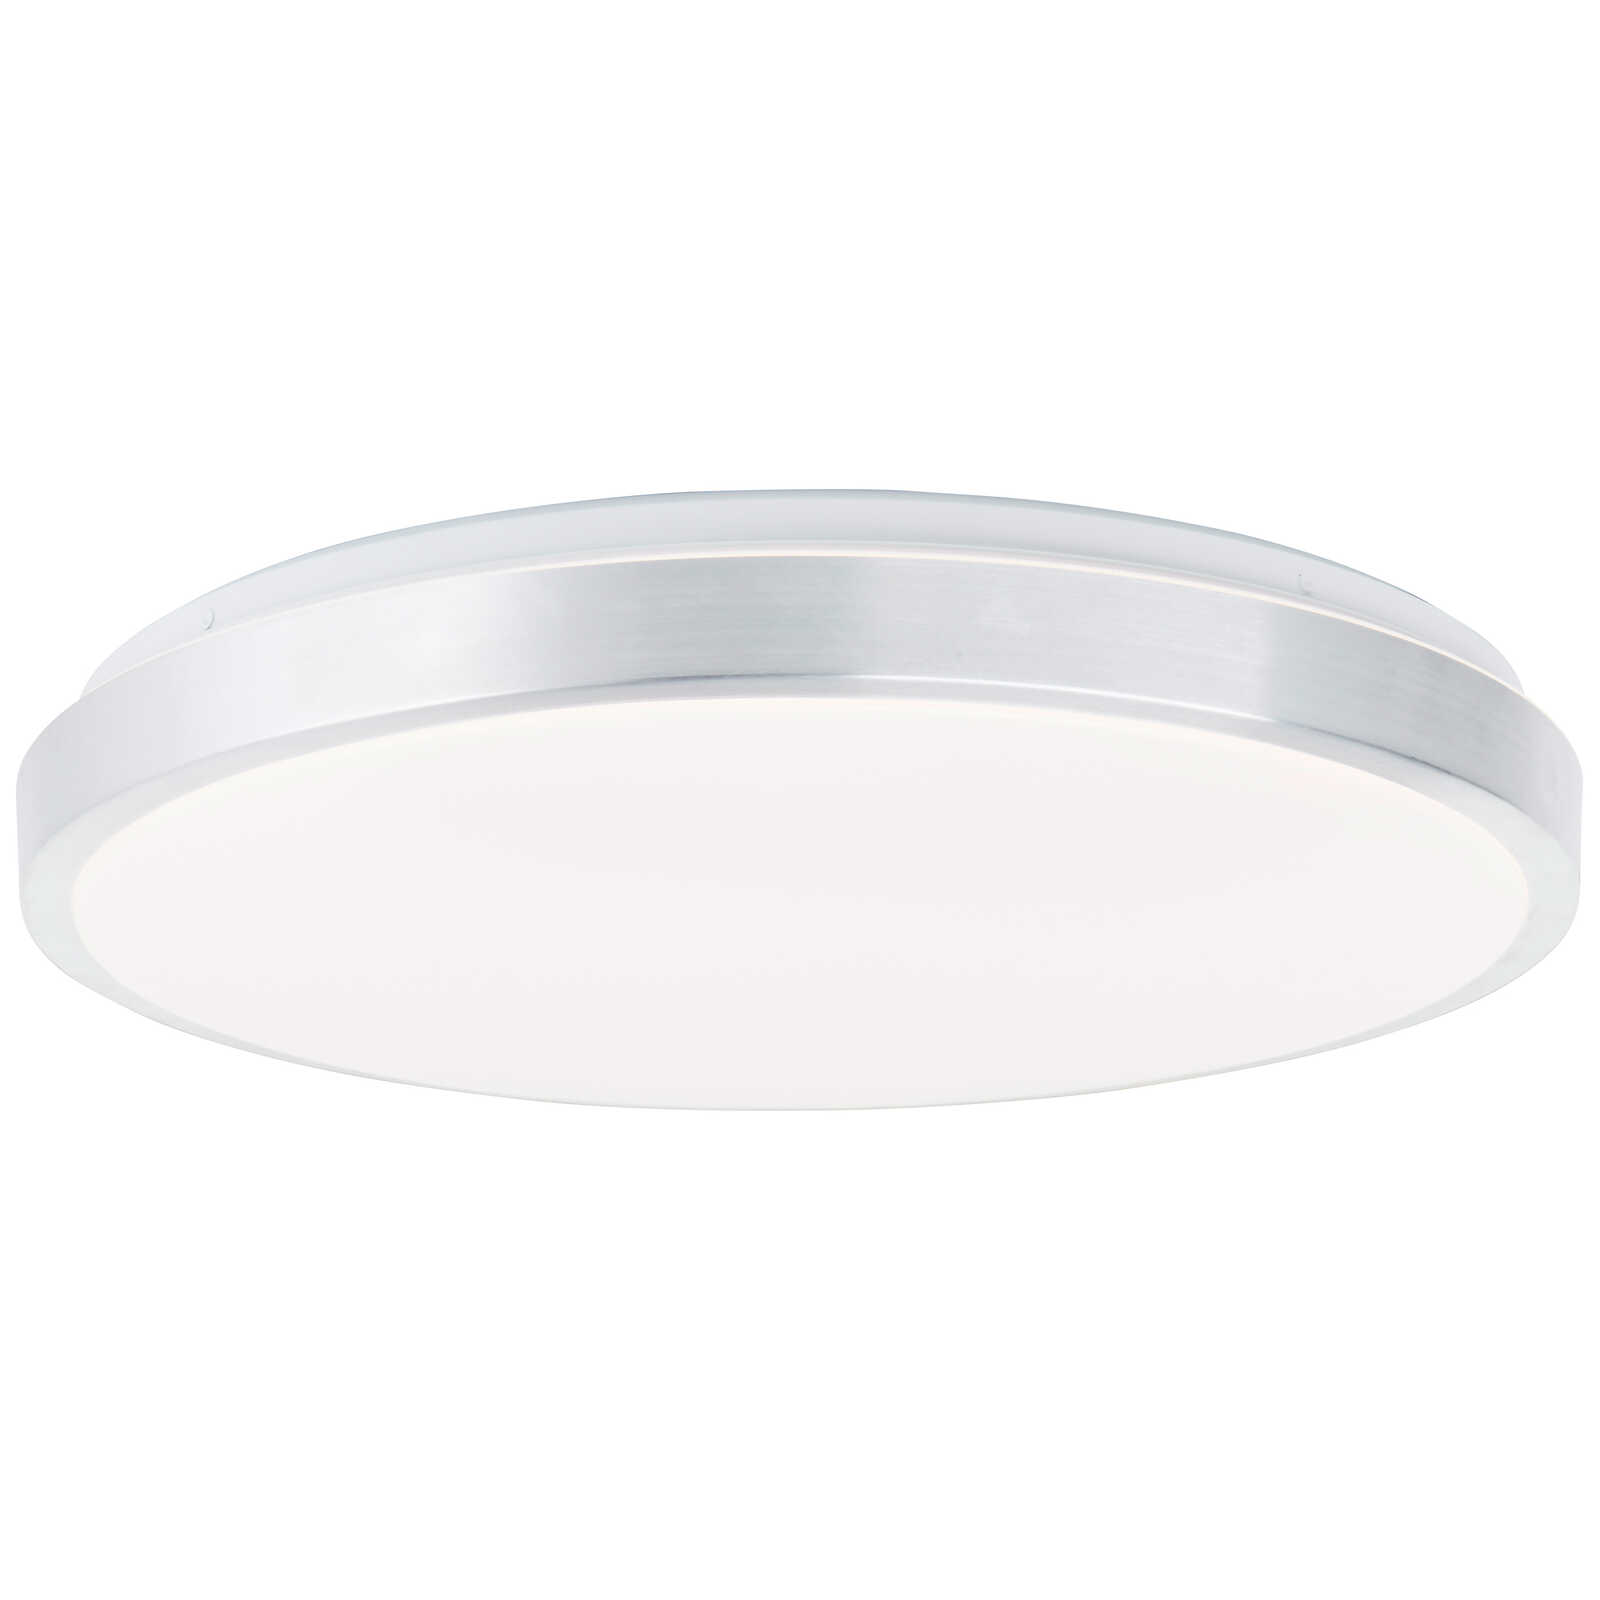             Metal wall and ceiling light - Laura - Metallic
        